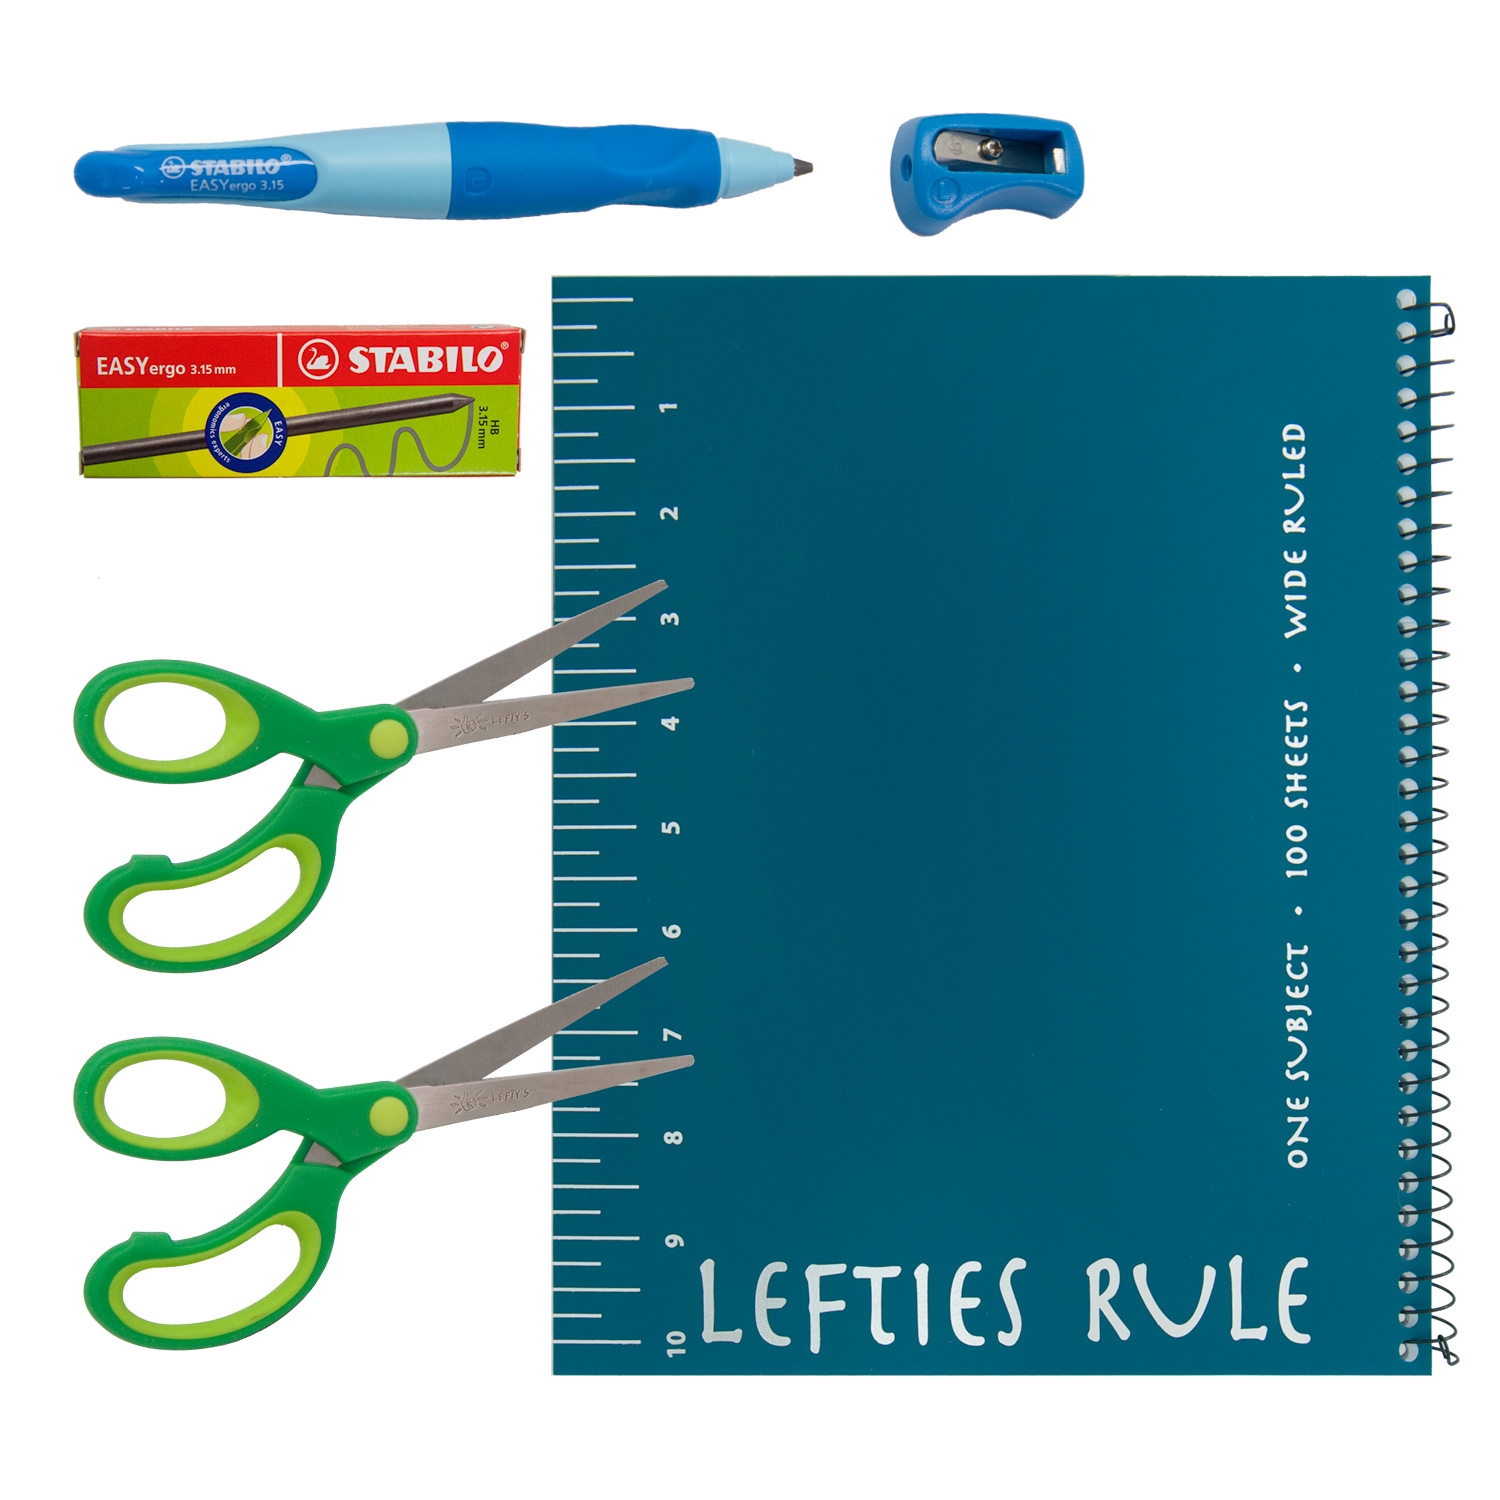  Lefty's True Left-Handed Scissors for General Purpose Use, 2  Sizes Included